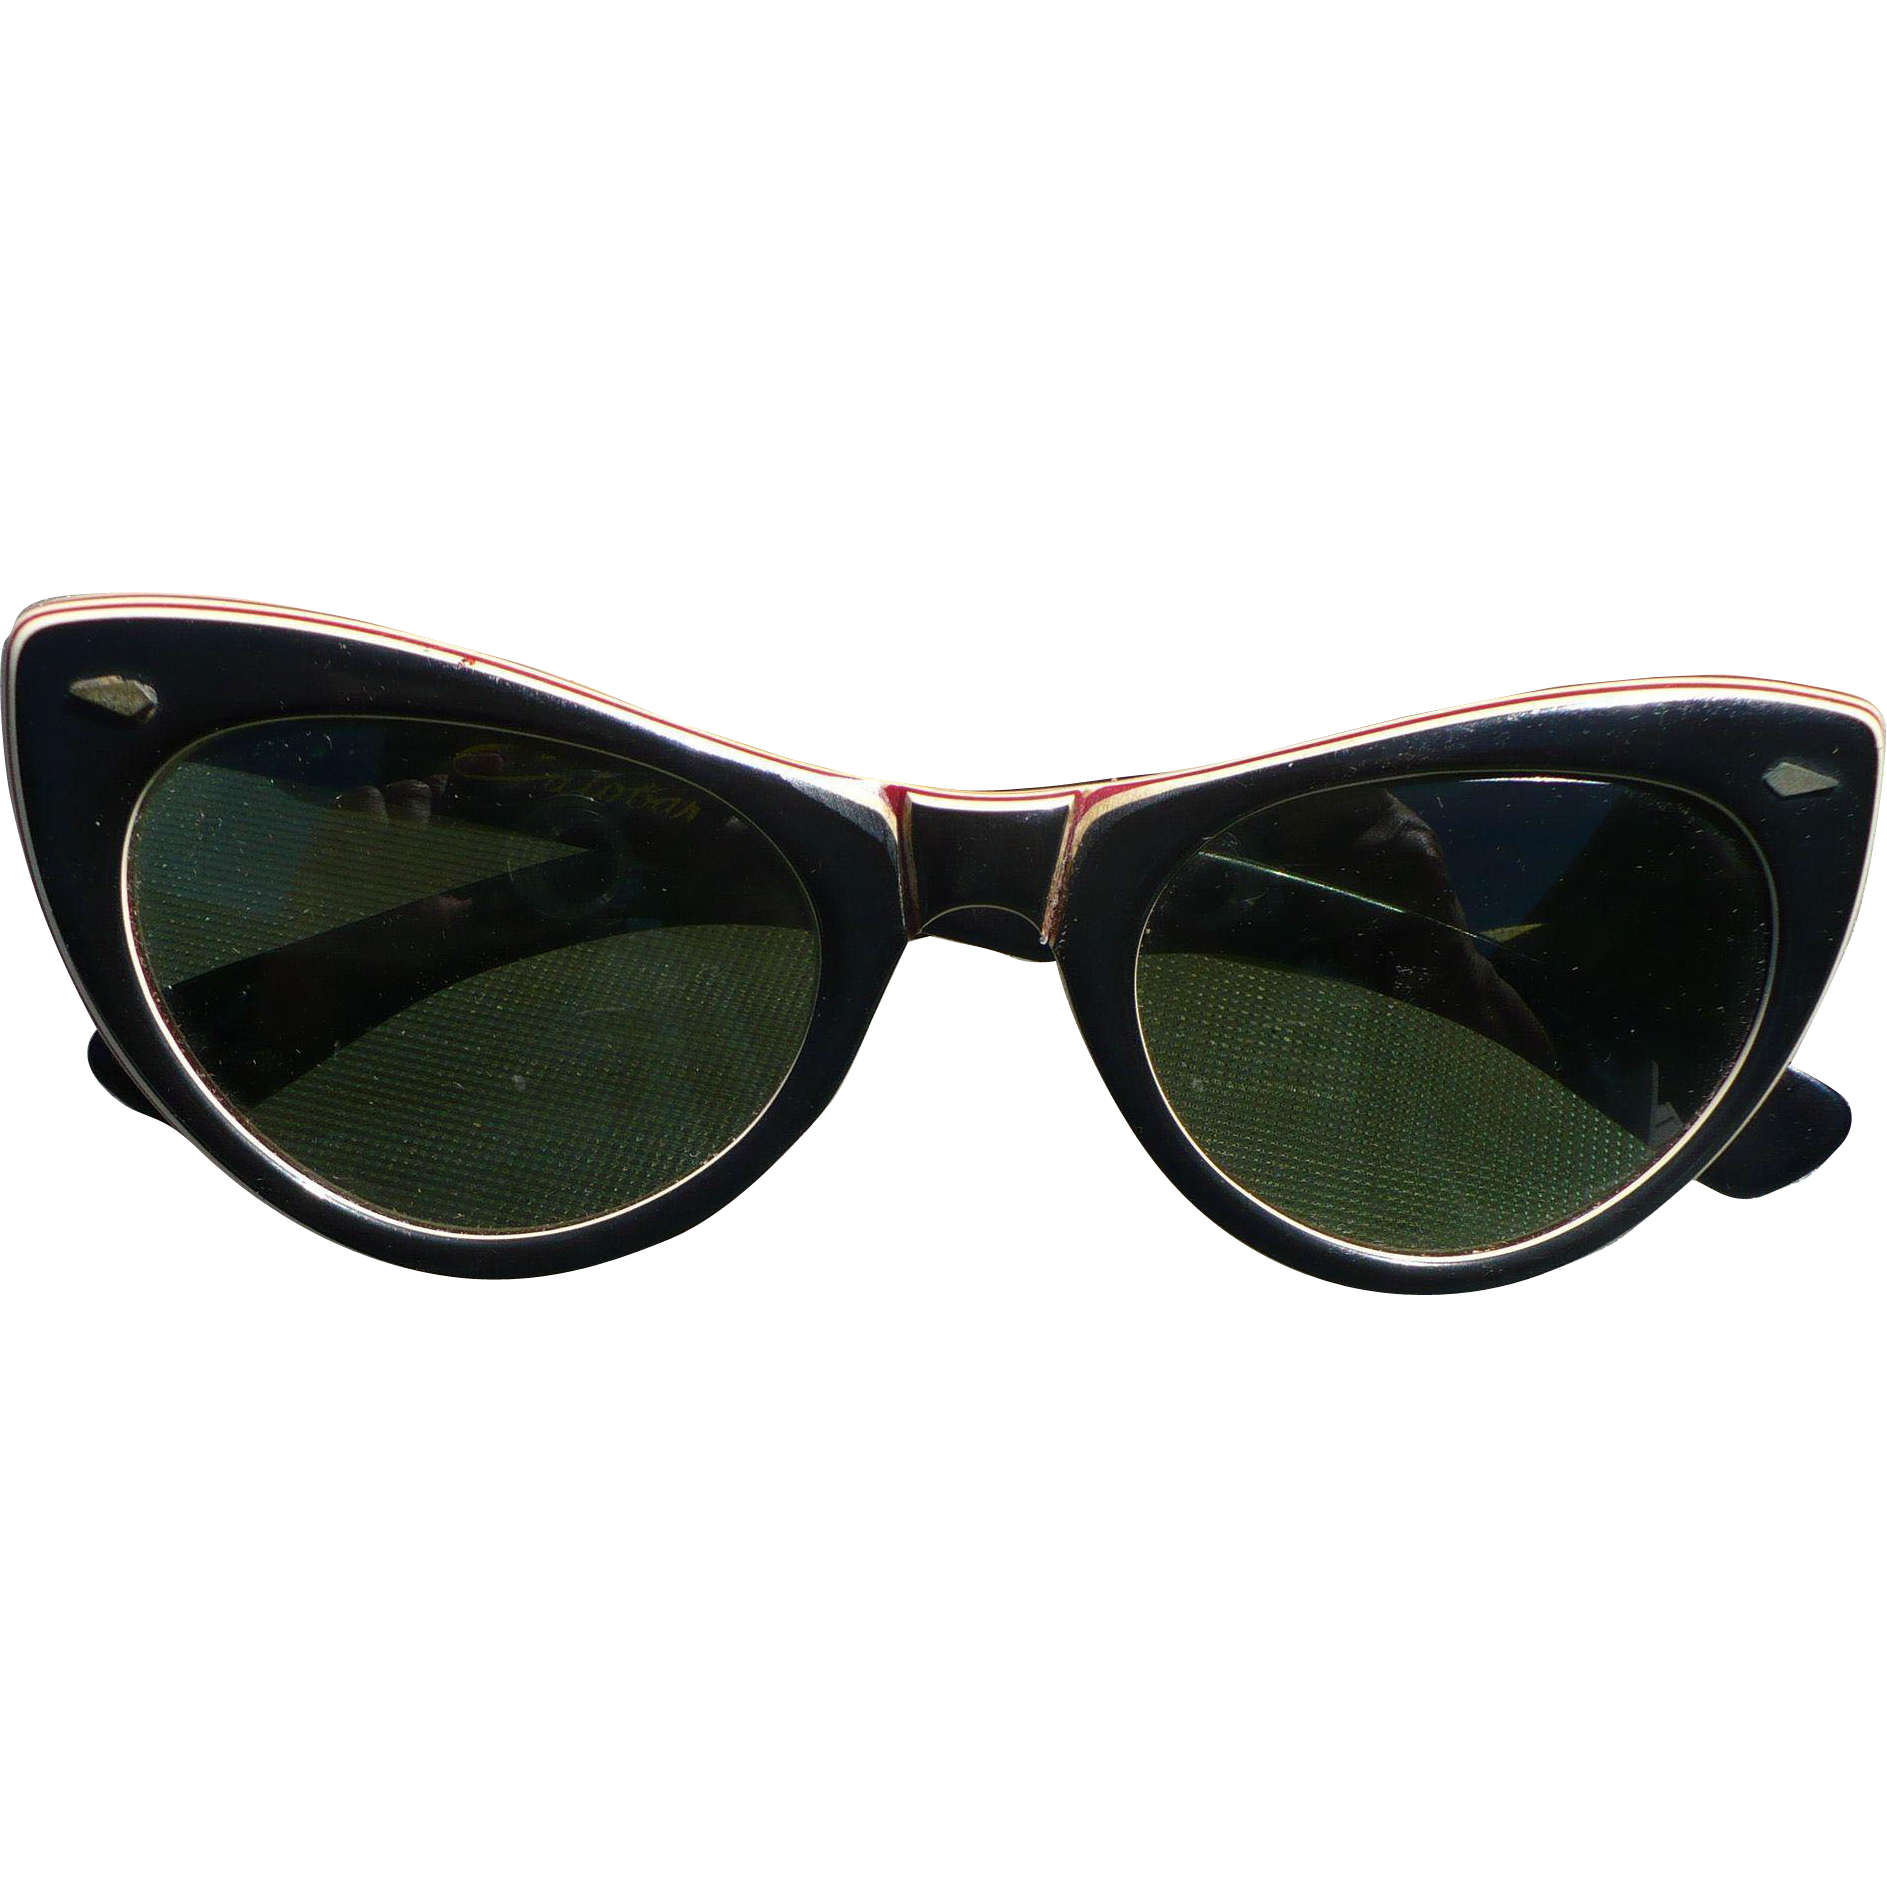 1960s Cats Eye Sunglasses From Looluus On Ruby Lane 